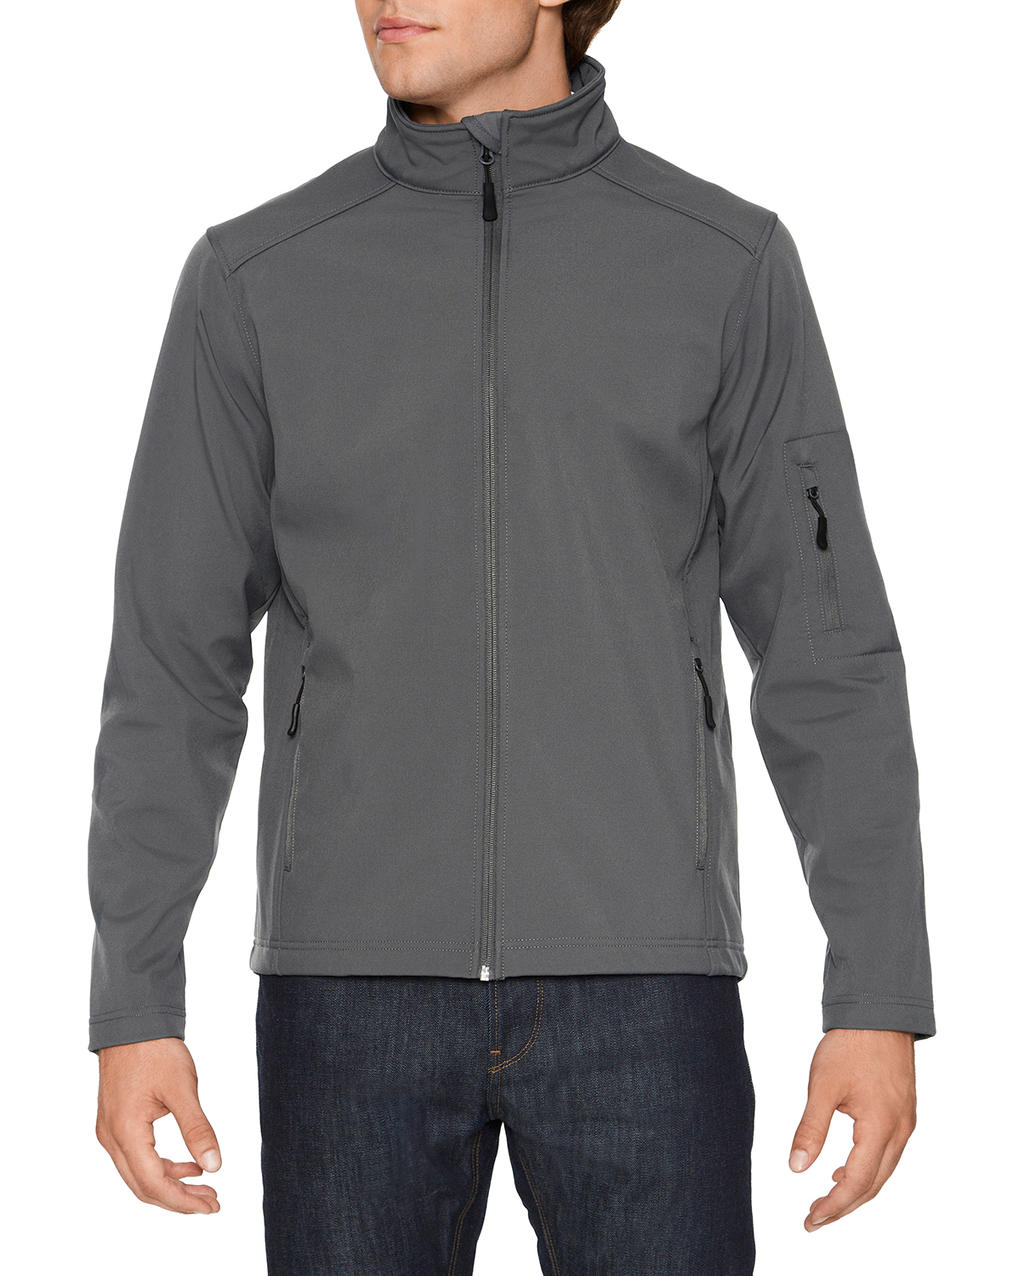  Hammer? Unisex Softshell Jacket in Farbe Charcoal